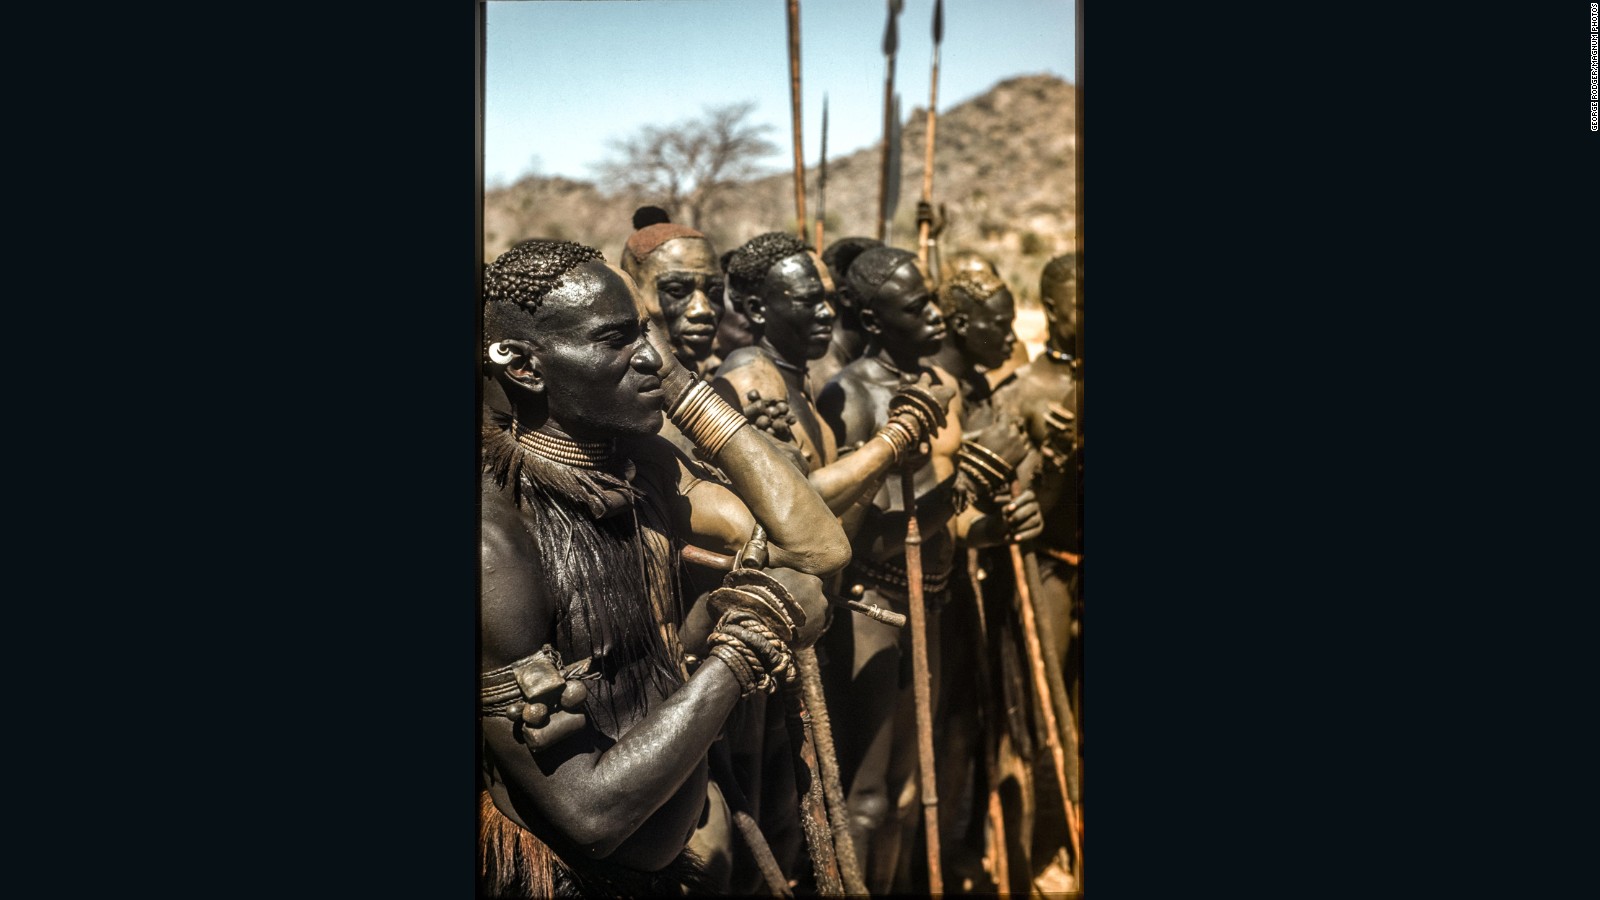 Lost Early Color Photographs Of Sudanese Tribes Published Cnn 0500